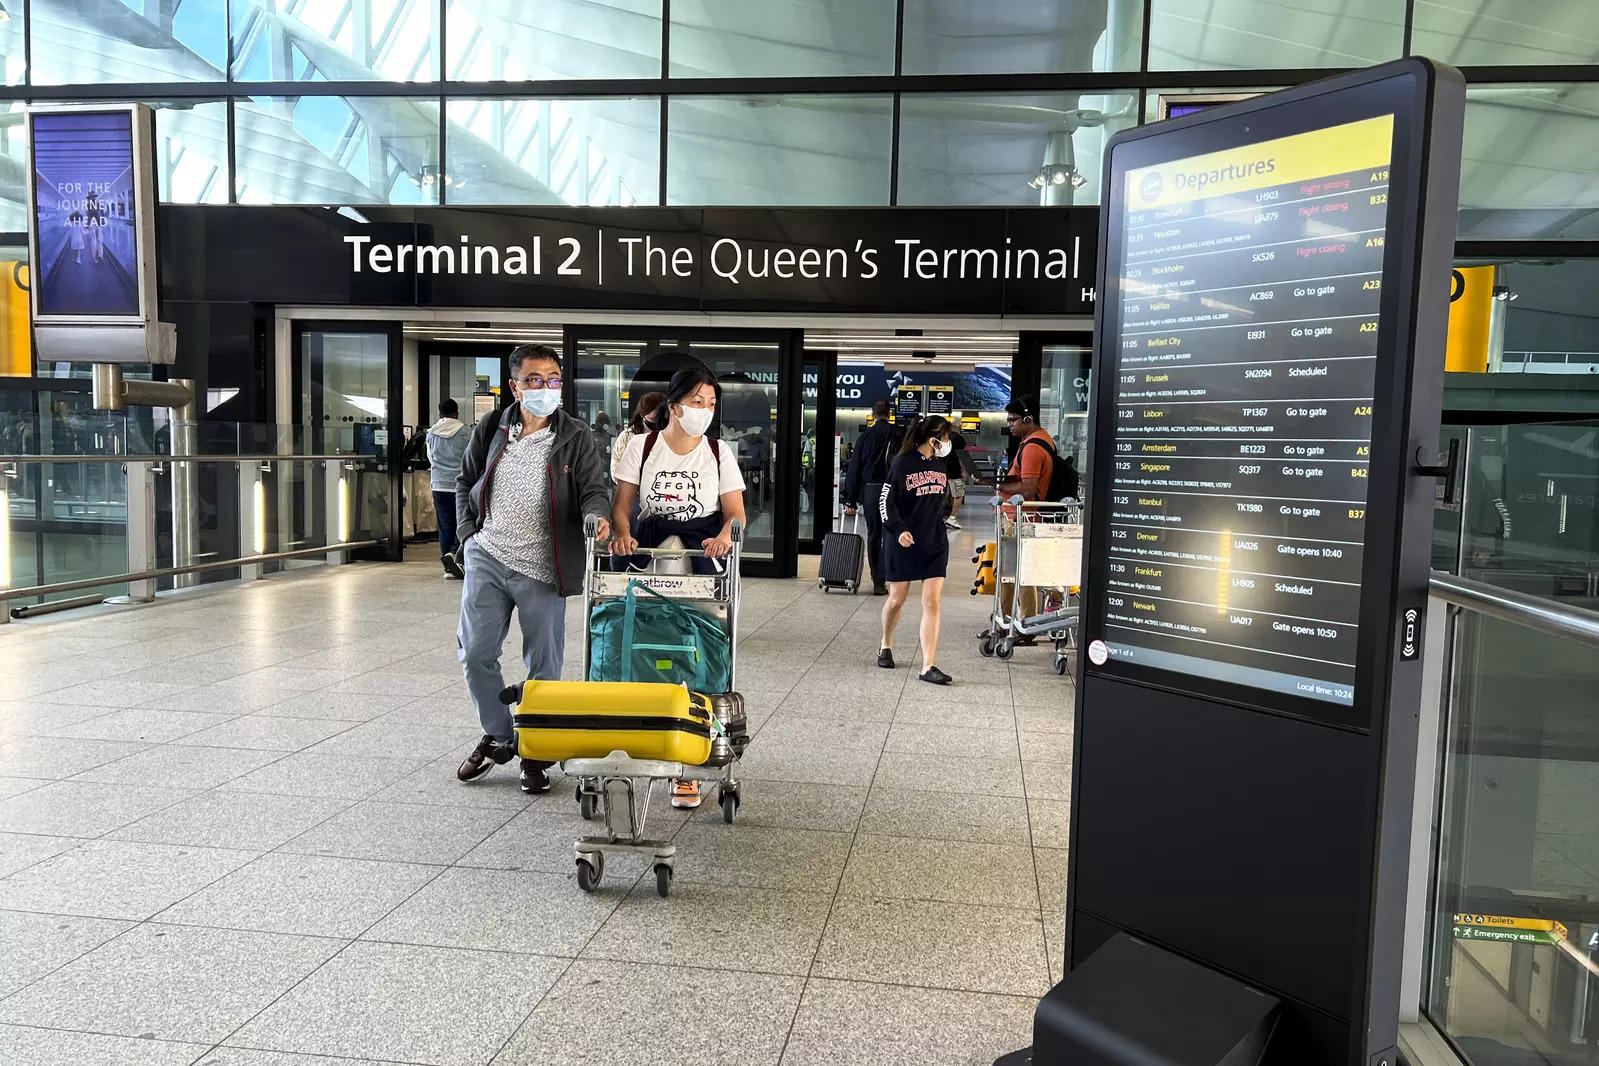 London Heathrow Airport: Which Airlines Use Which Terminals?